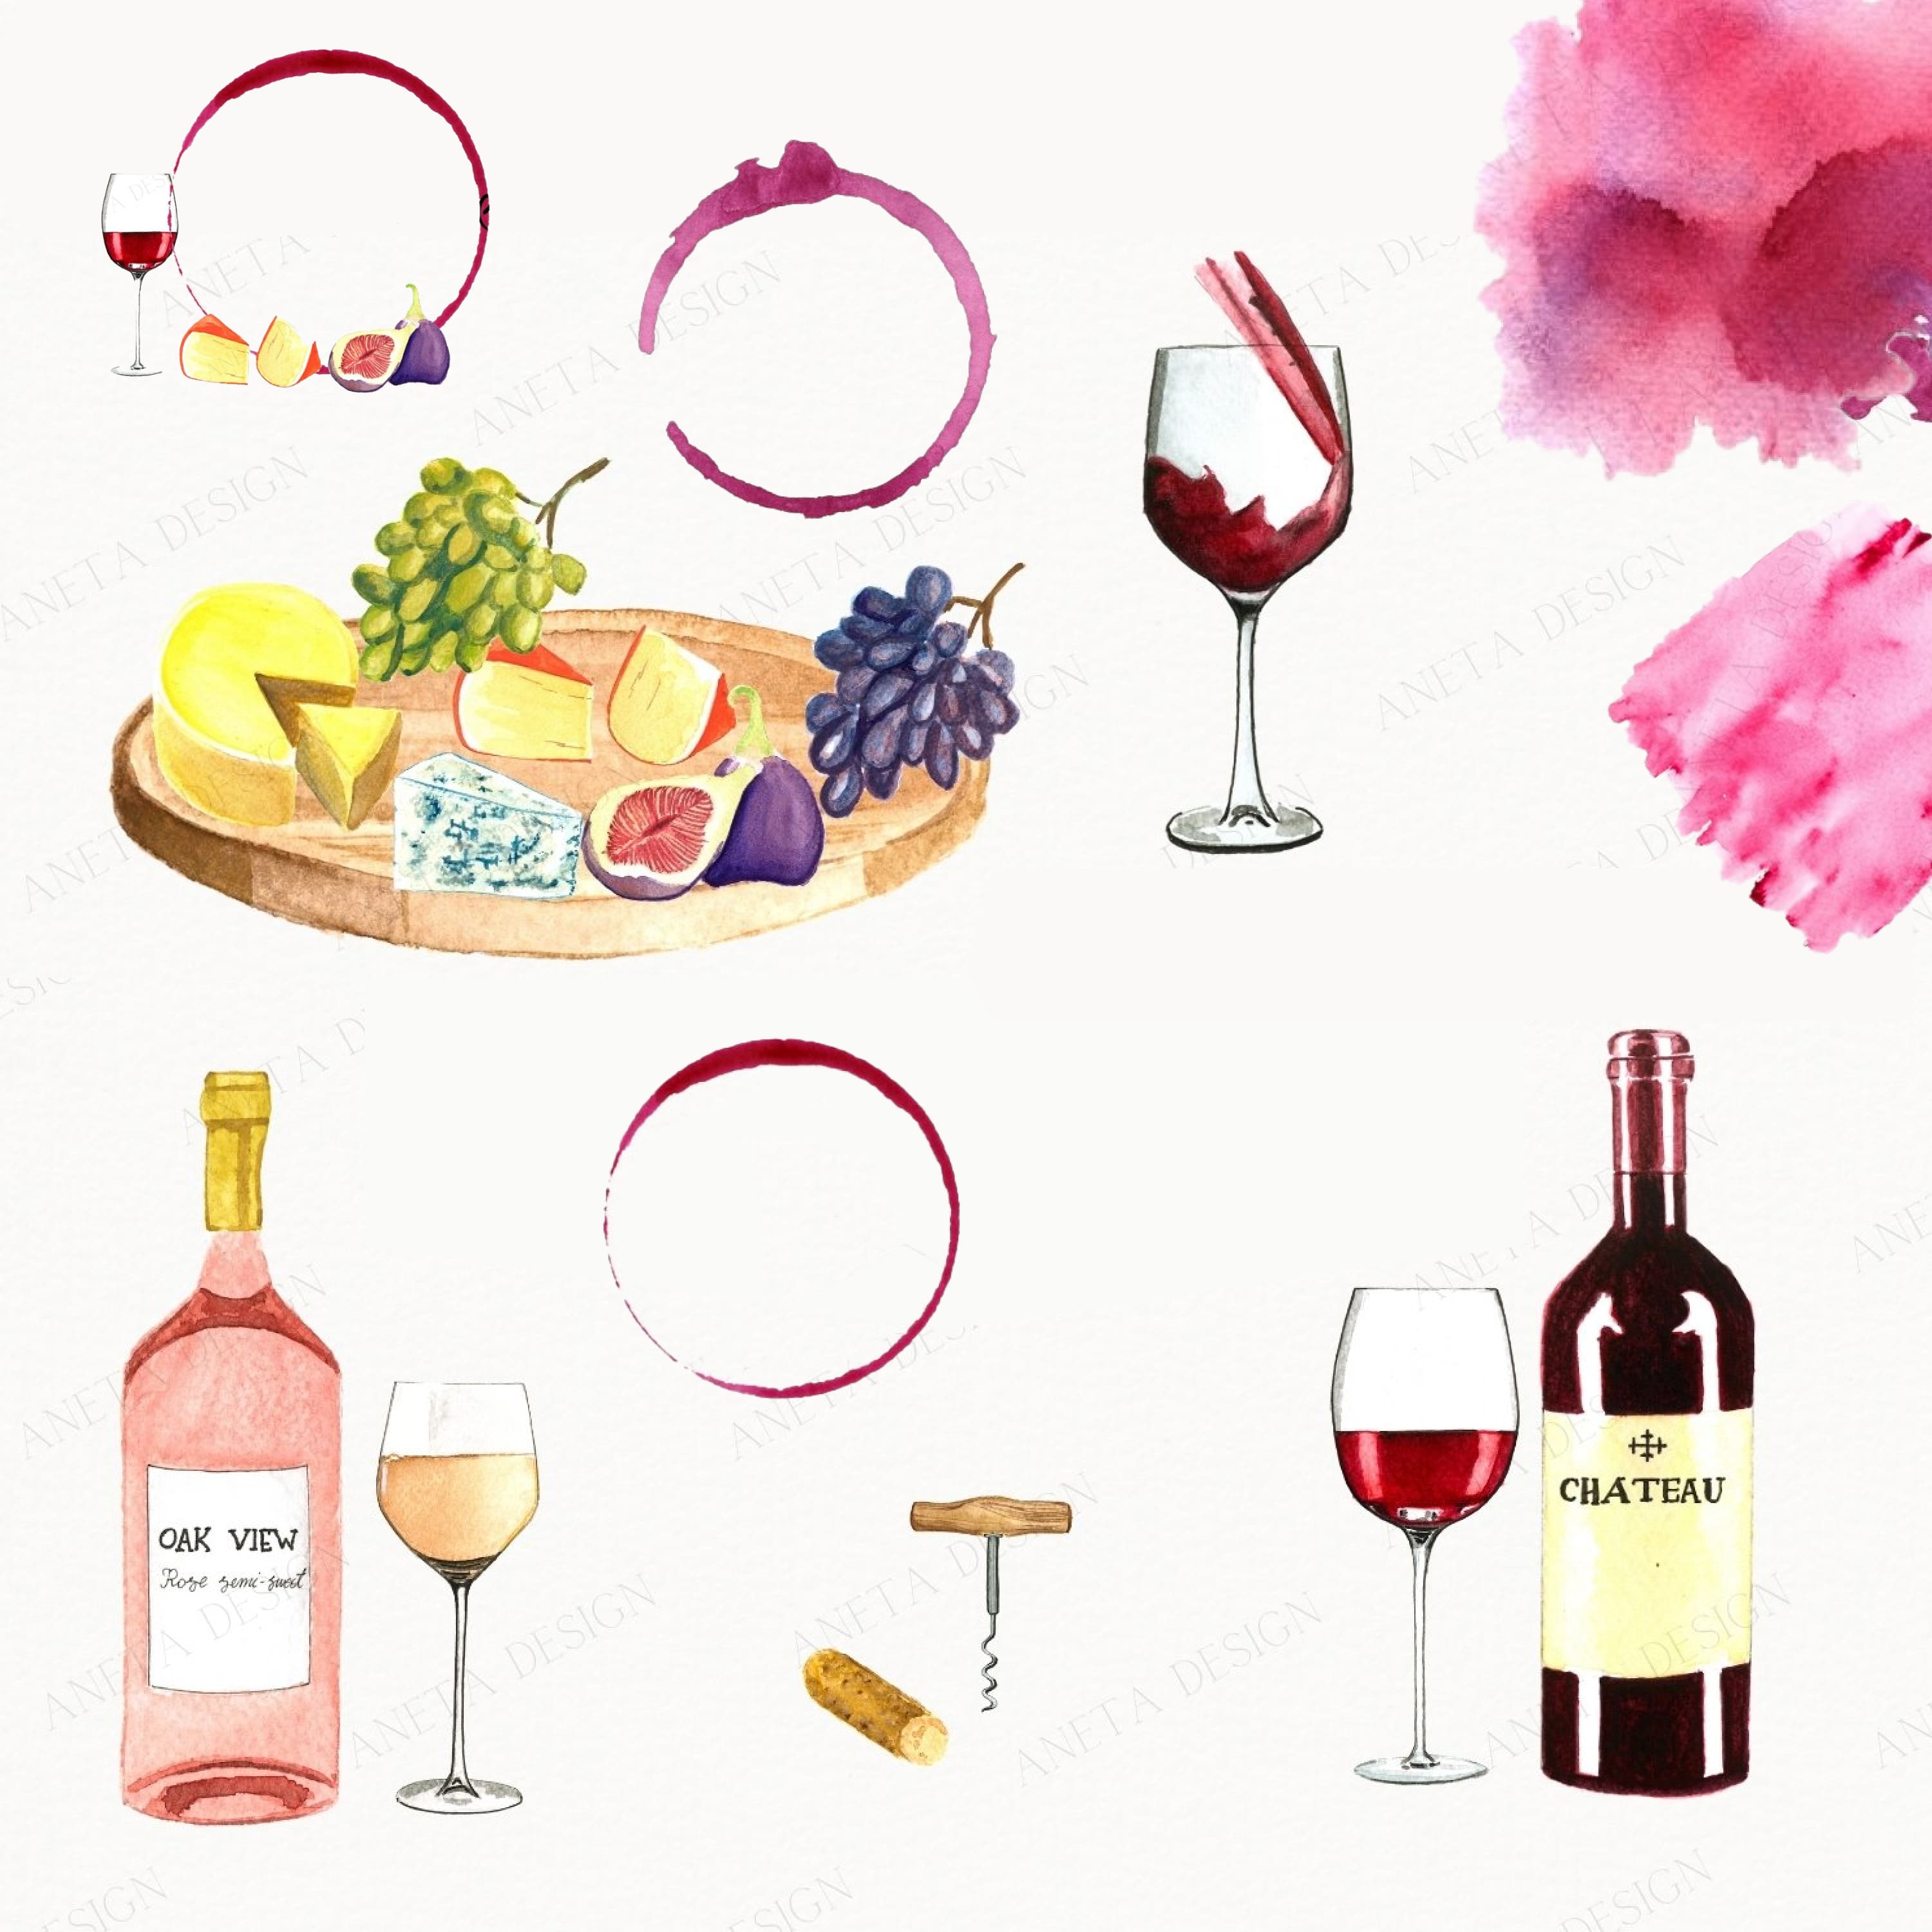 Set of colorful images of hard cheese, wine bottles, grapes.